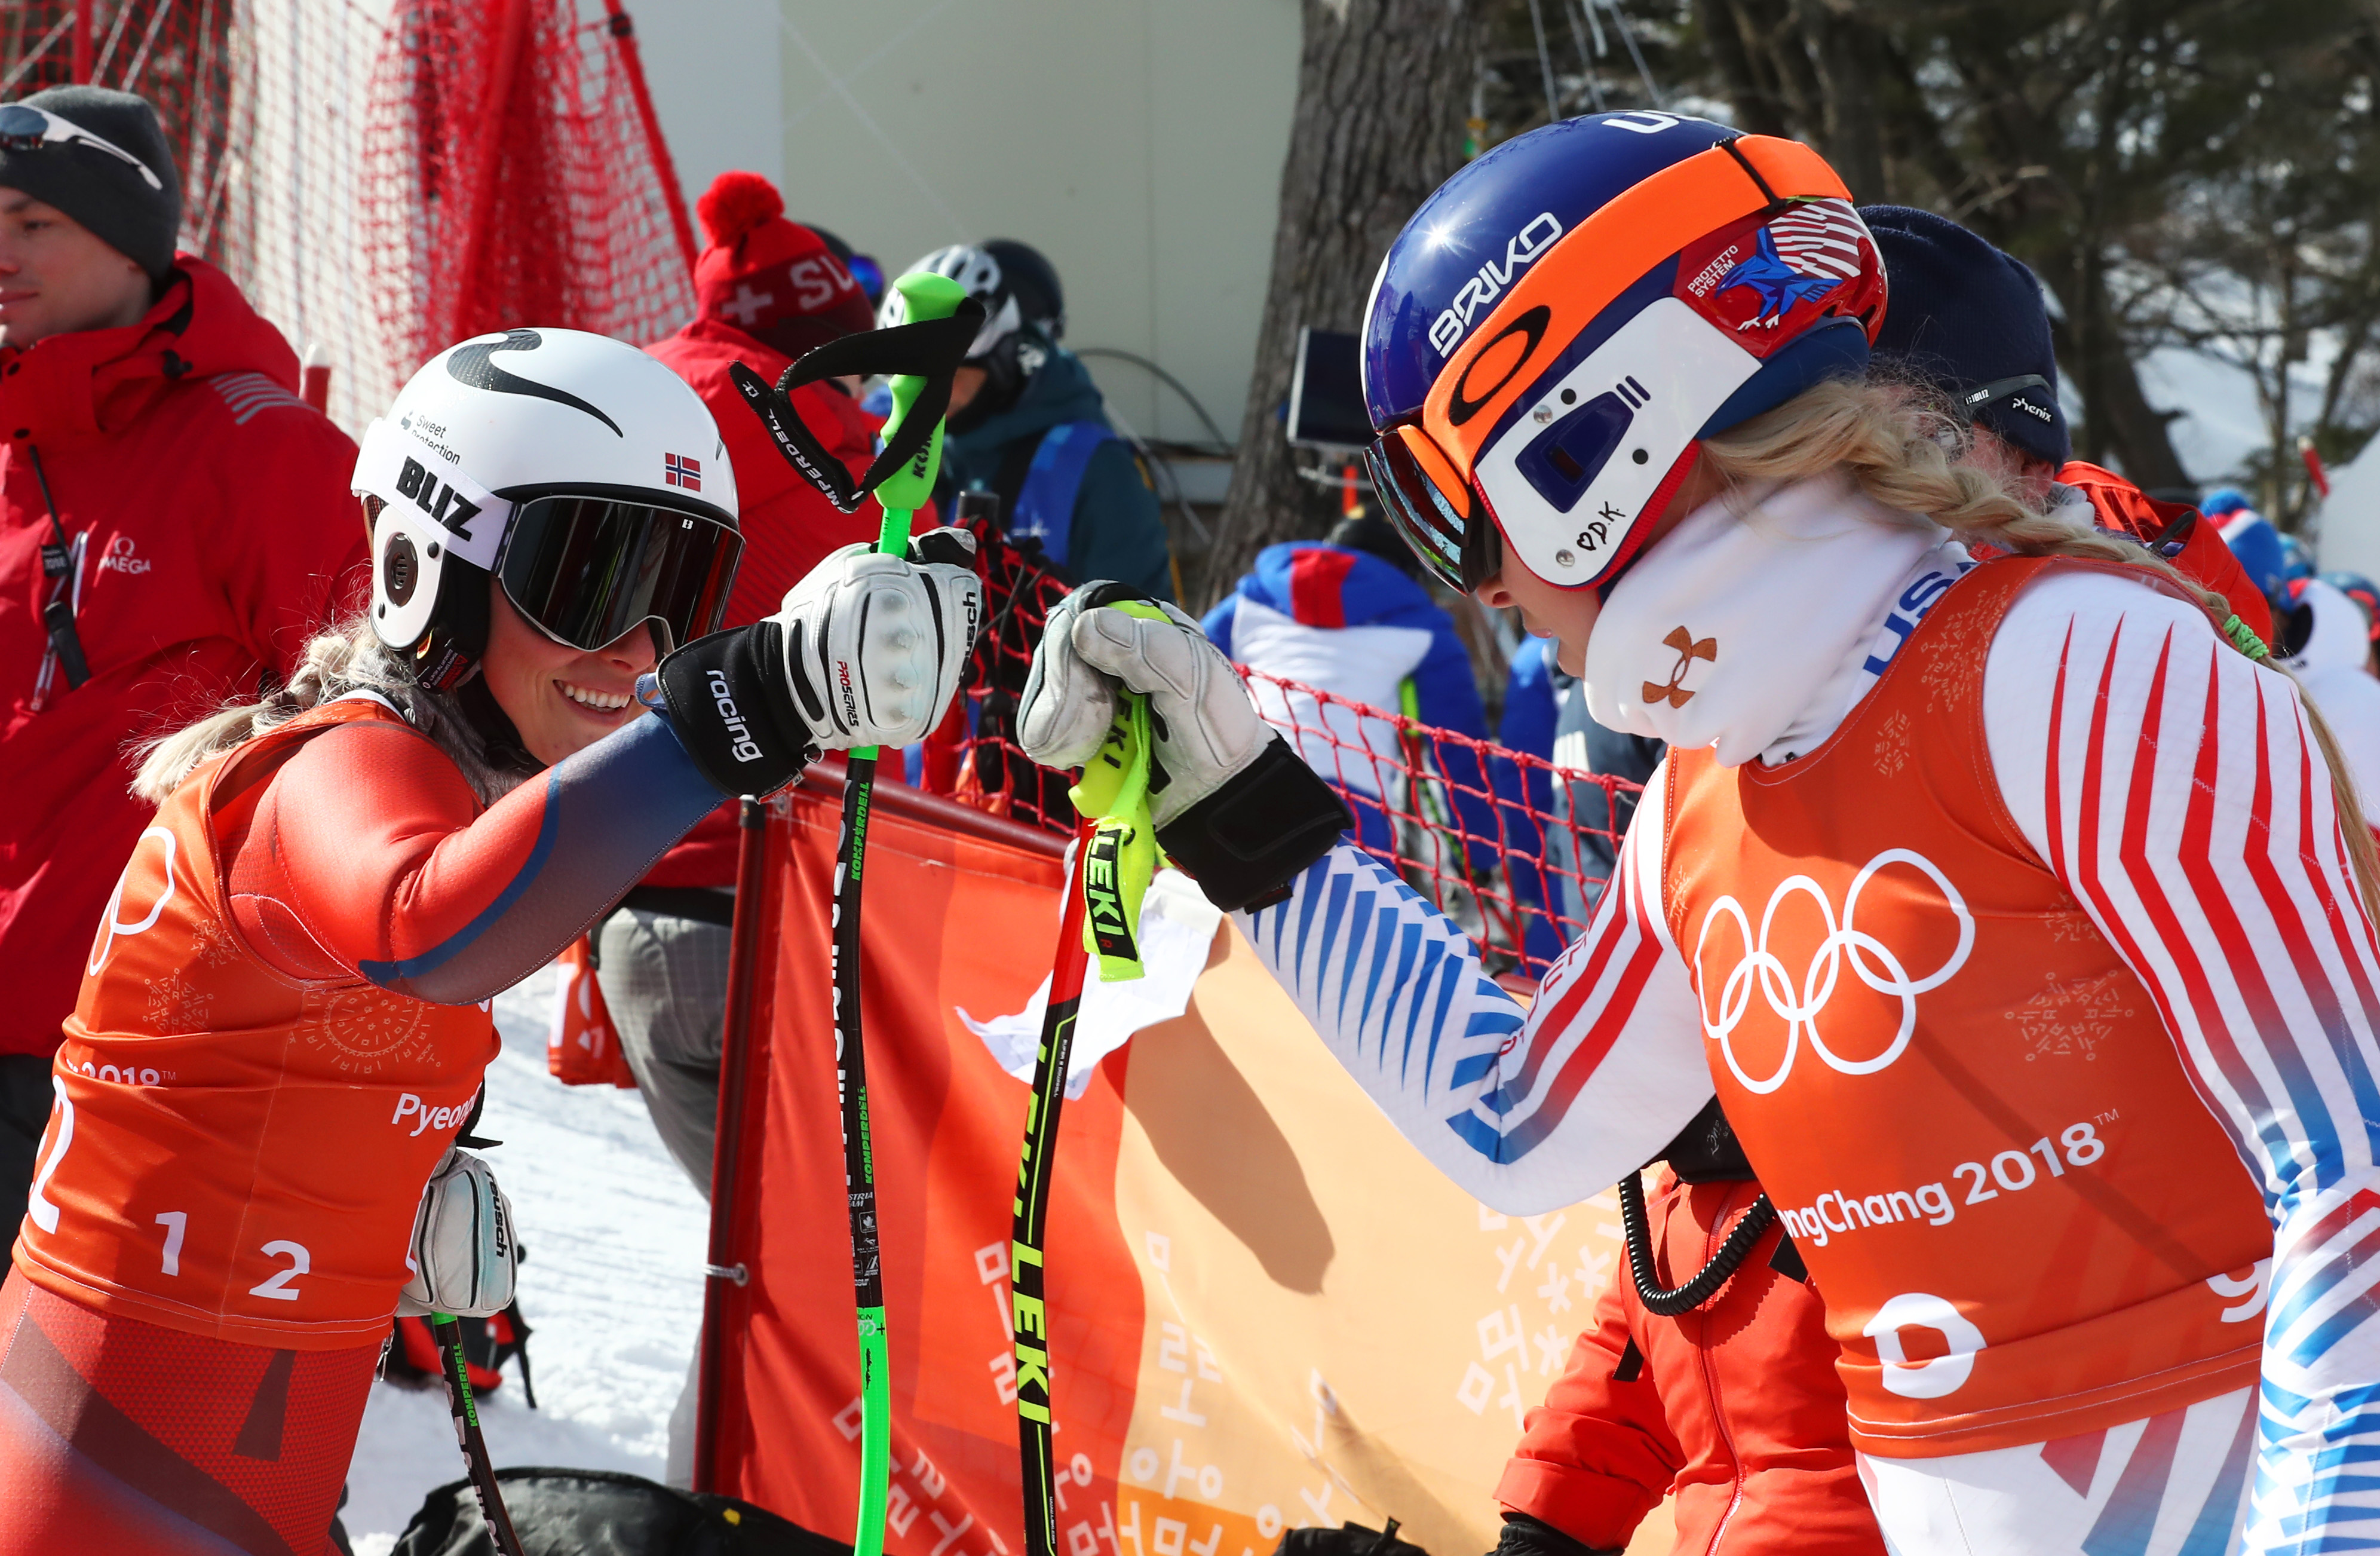 Lindsey Vonn and Ragnhild Mowinckel of Norway fist bump after the third training downhill training run Tuesday at Jeongseon Alpine Centre. (Getty Images - Alexander Hassenstein)